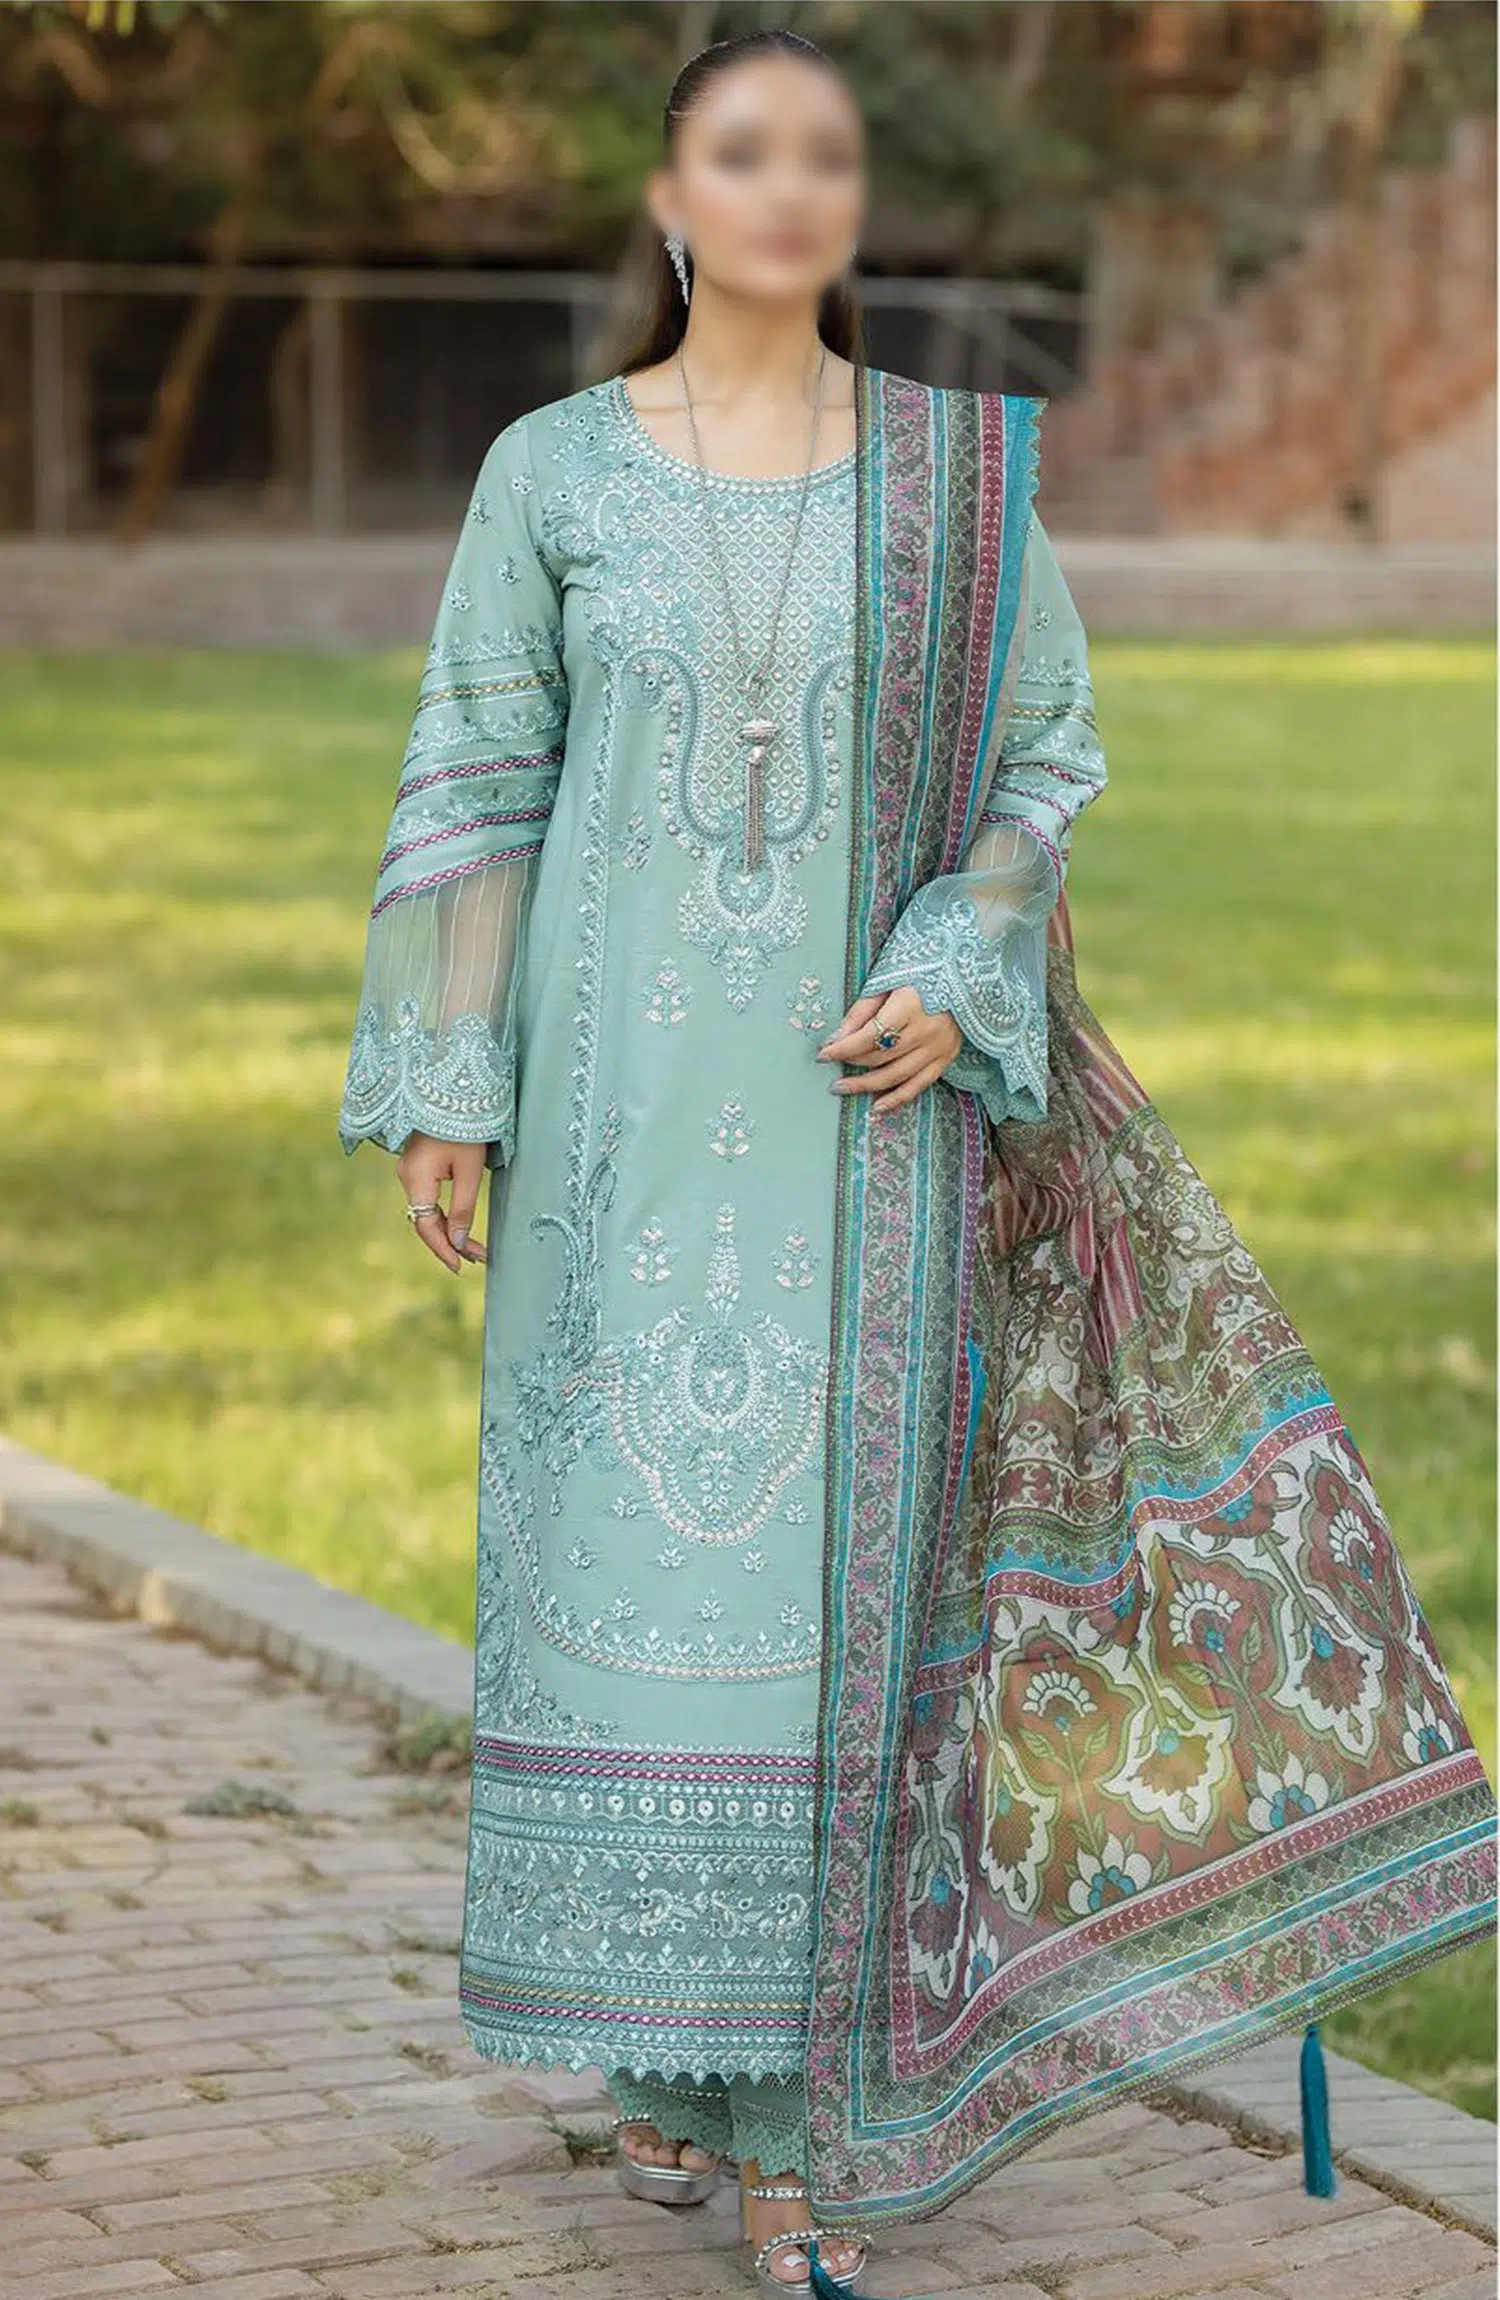 Subah-e-Roshan Luxury Lawn Collection by Serene - SL 73 ZAIB